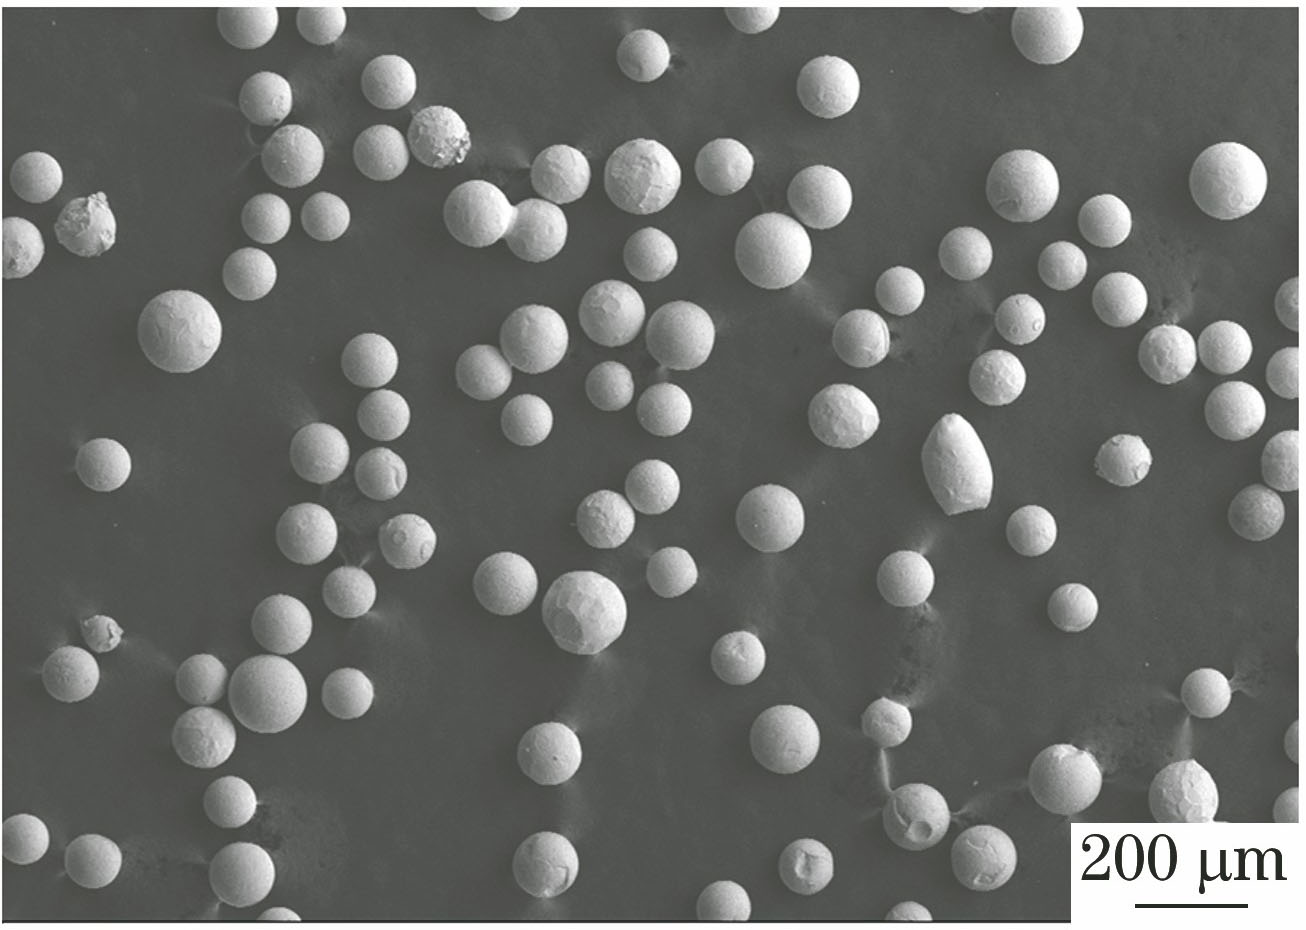 Morphology of spherical WC particles